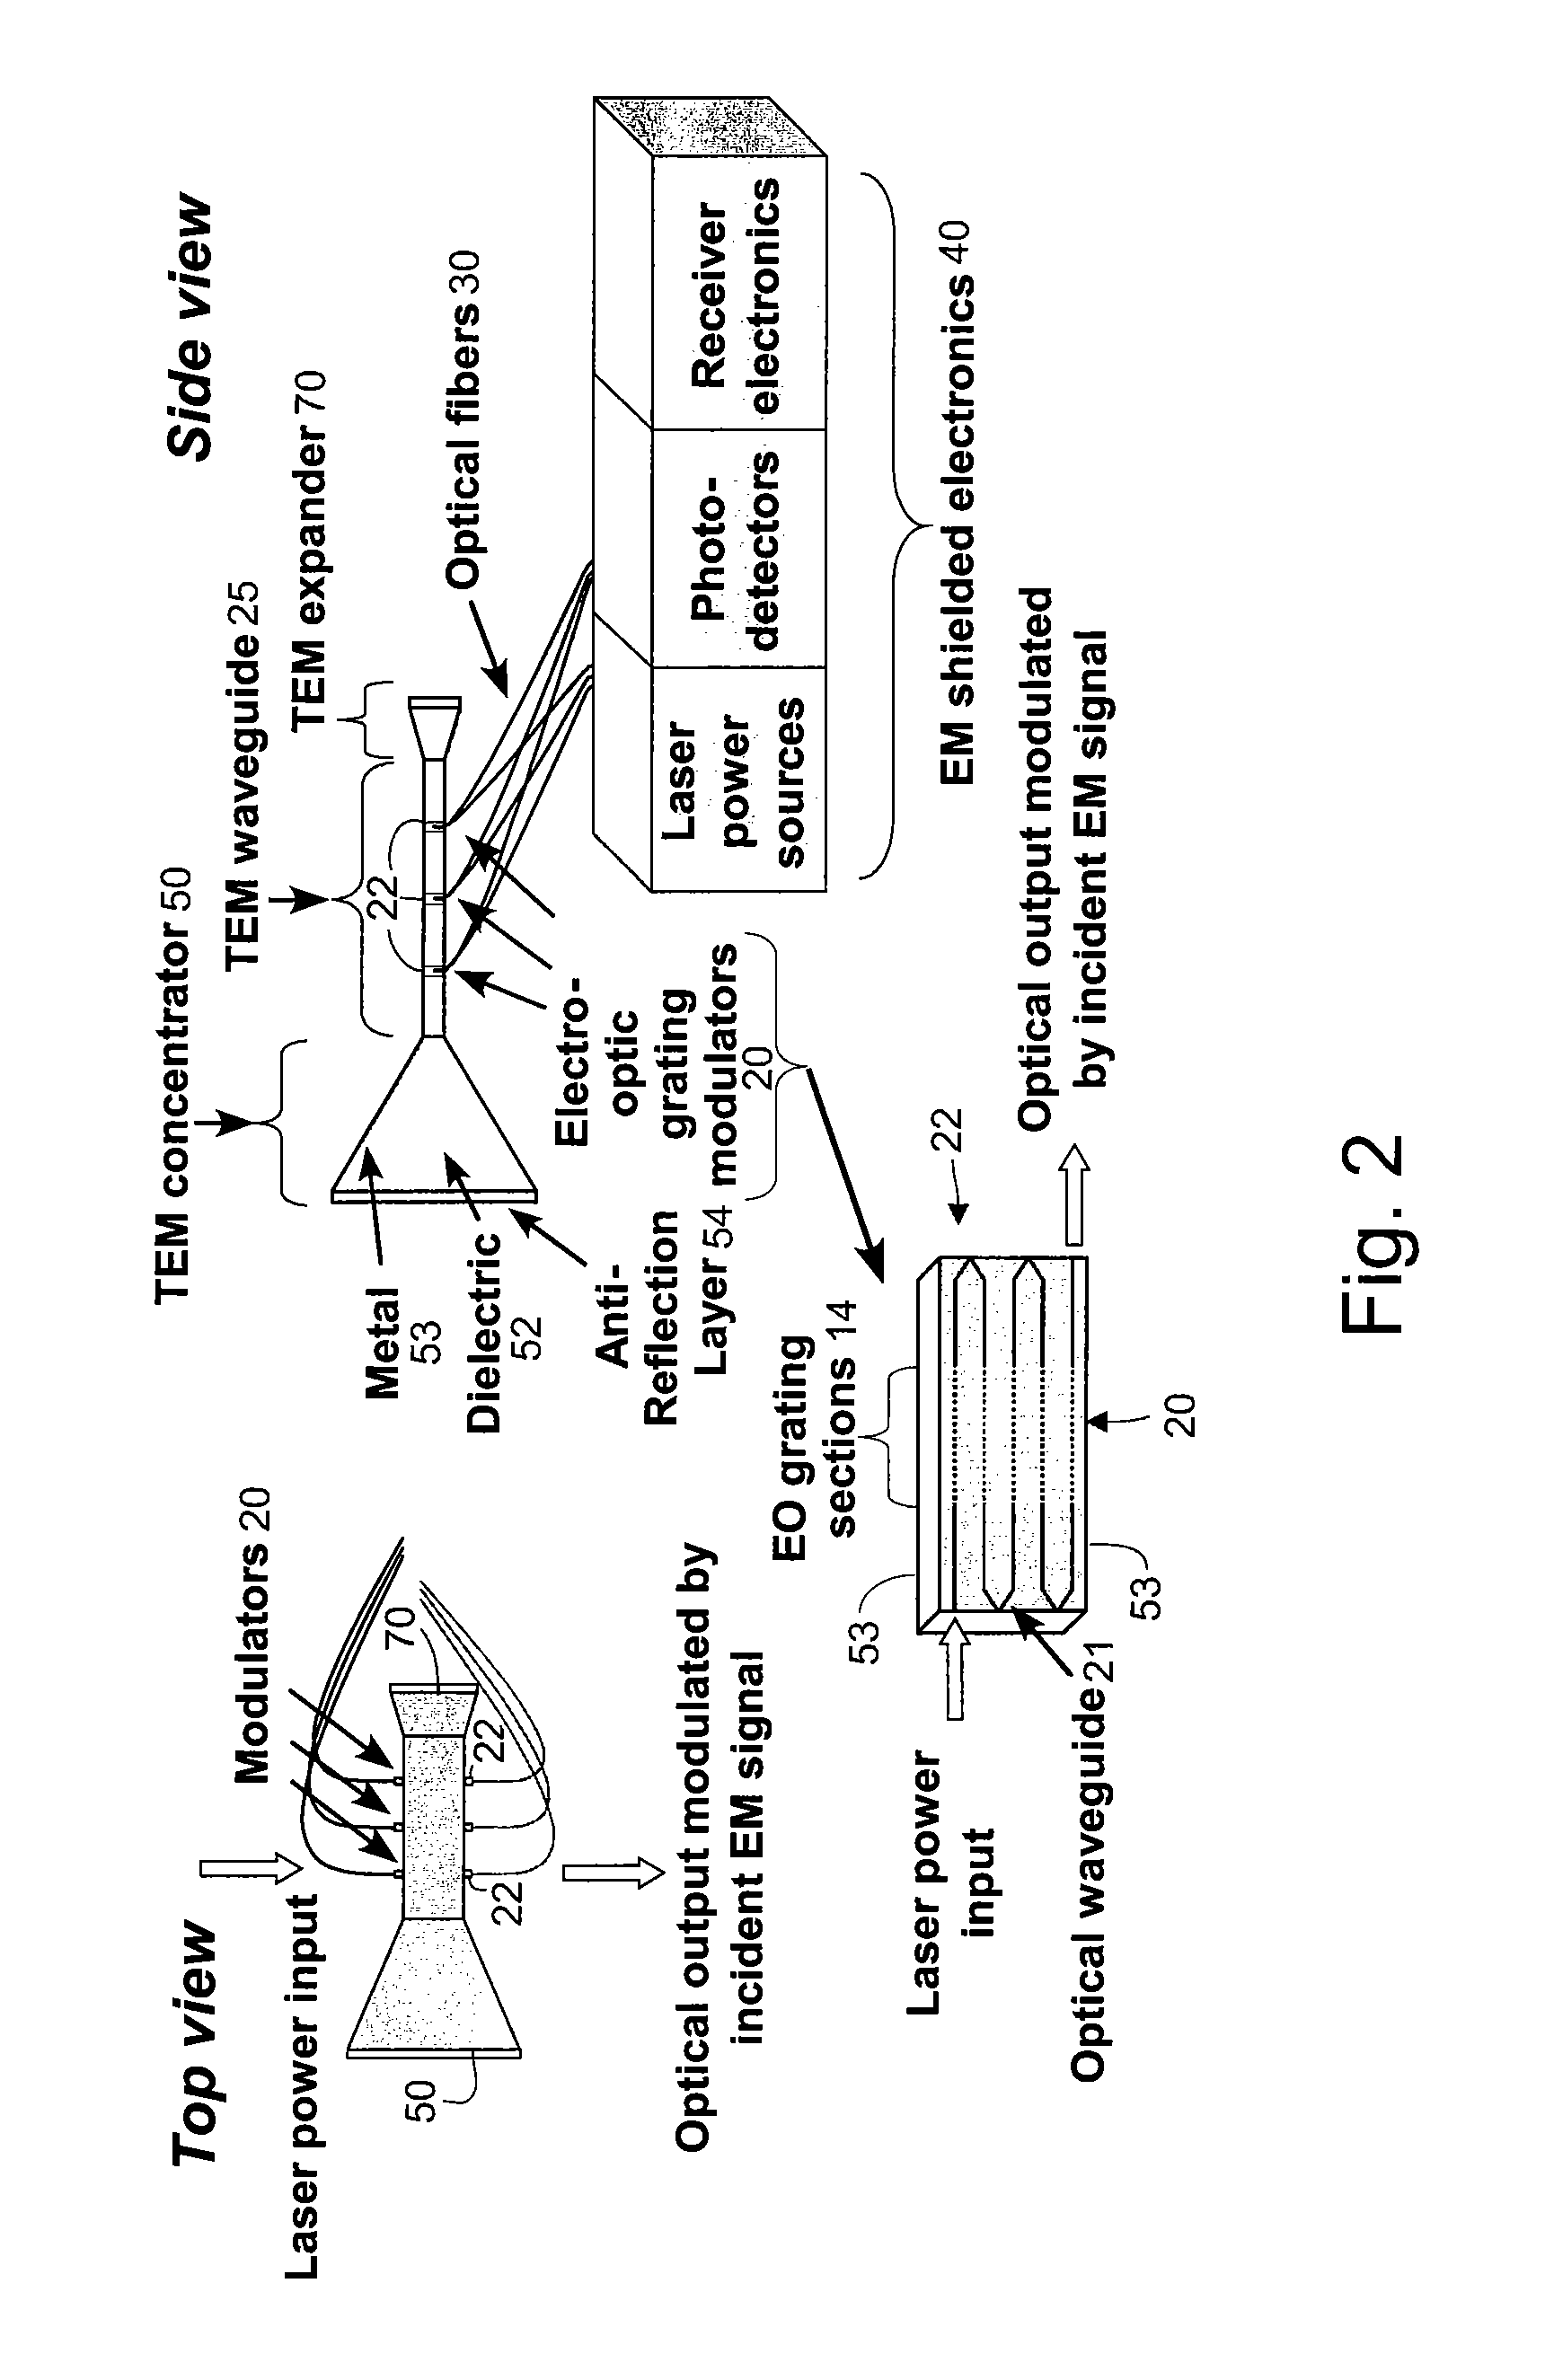 Microwave receiver front-end assembly and array